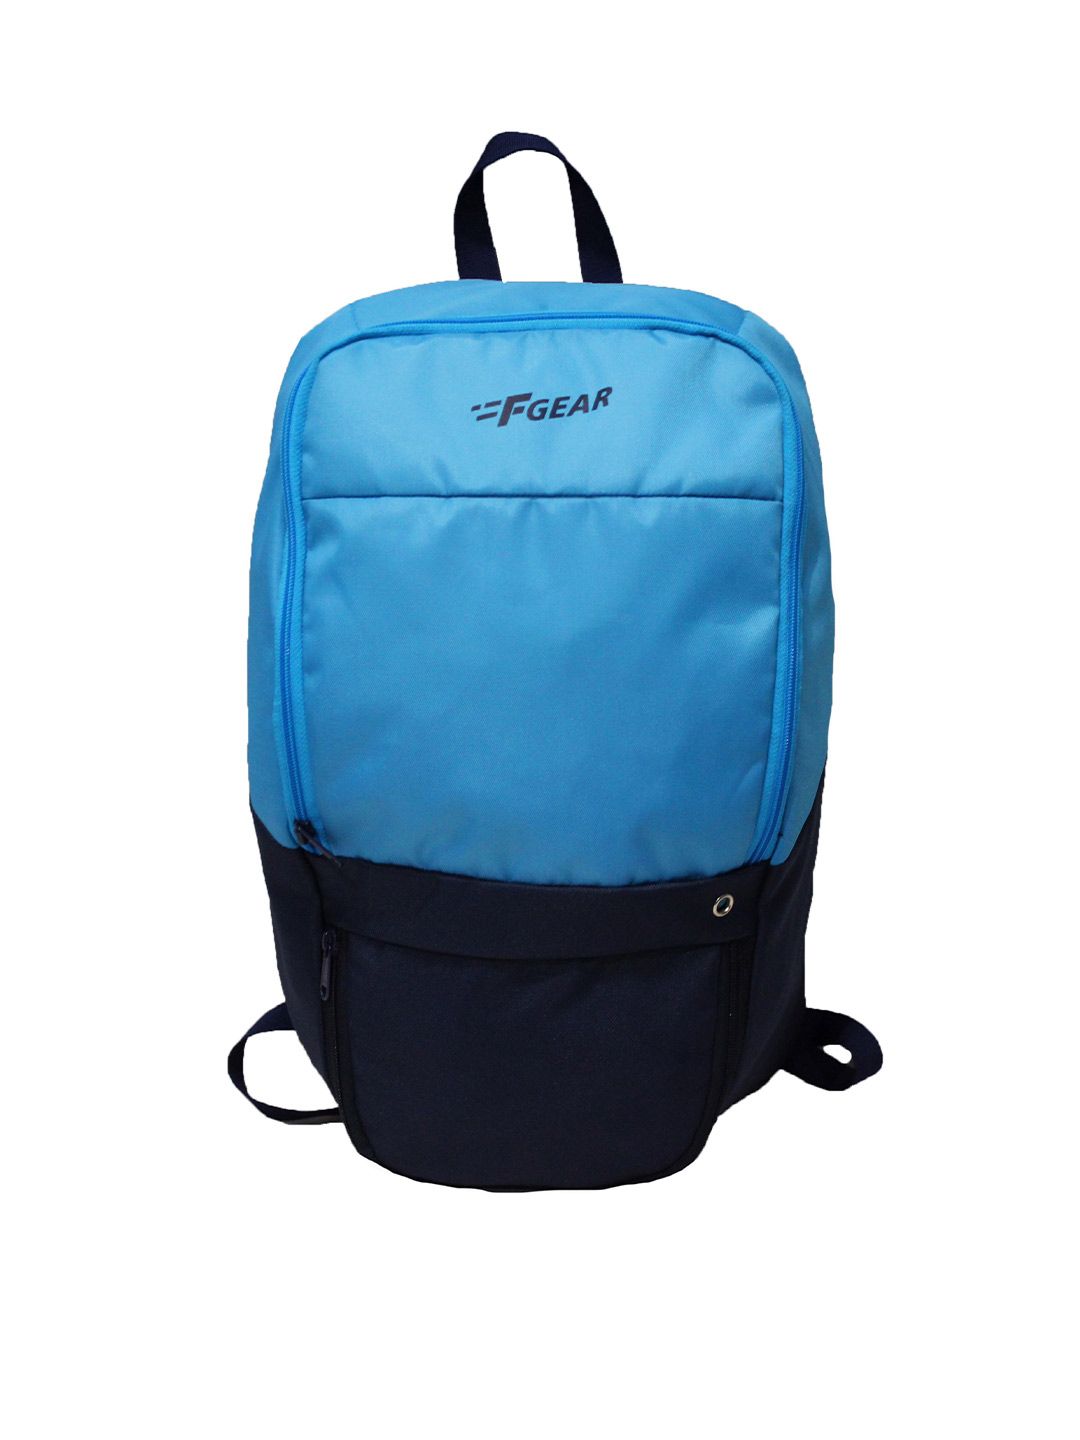 F Gear Unisex Blue Colourblocked Backpacks with Shoe Pocket Price in India